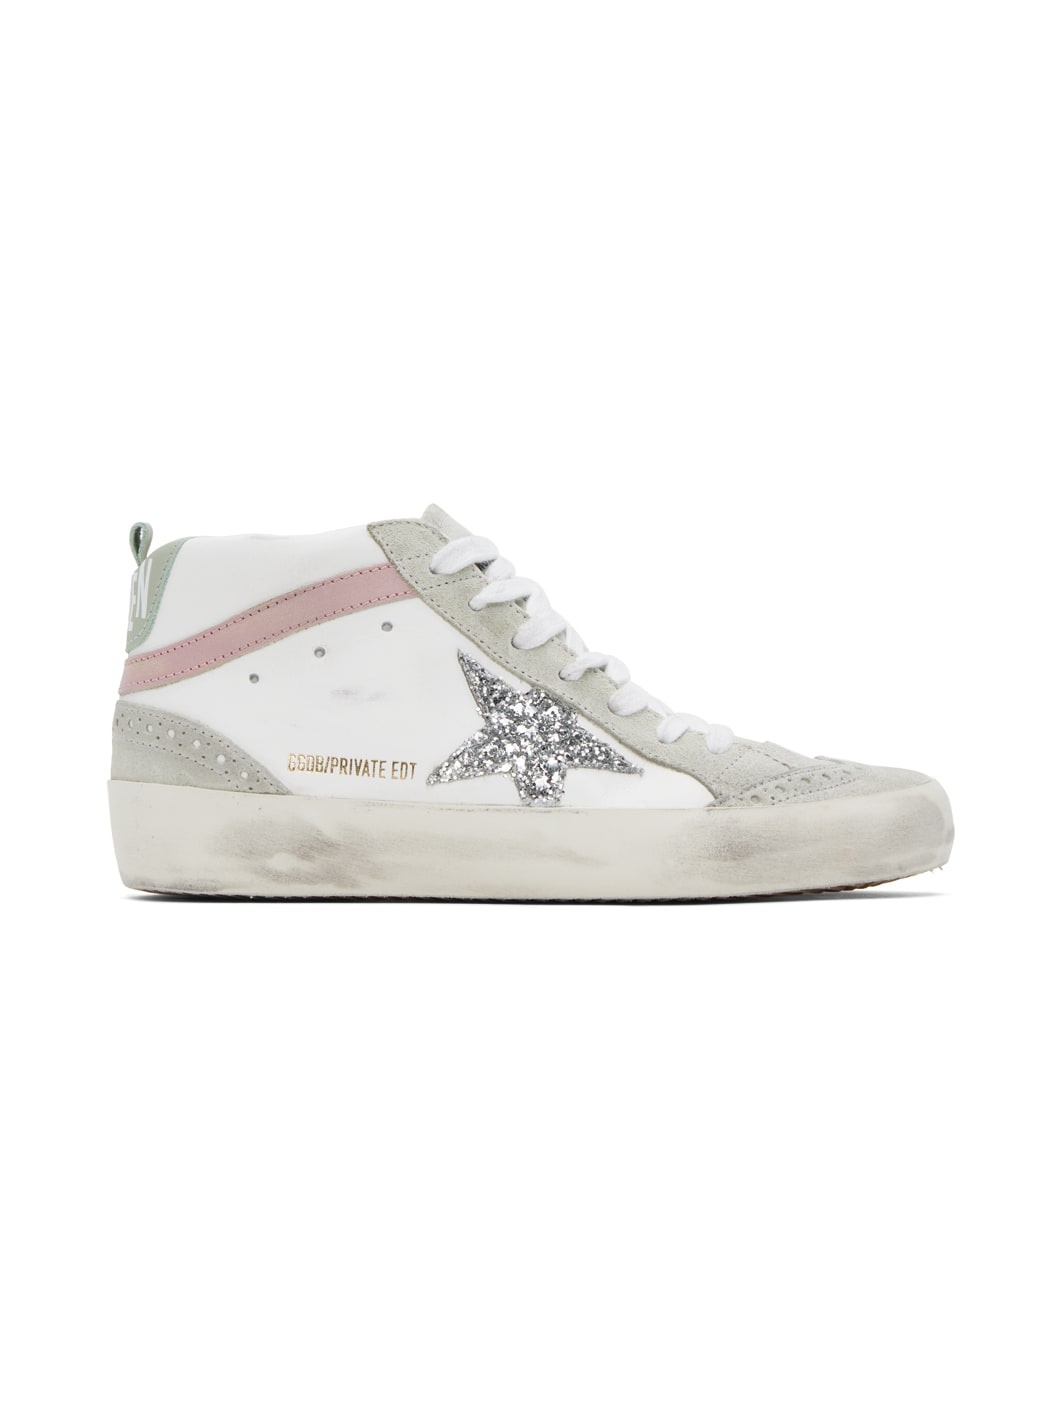 SSENSE Exclusive White & Gray Mid Star Sneakers - 1